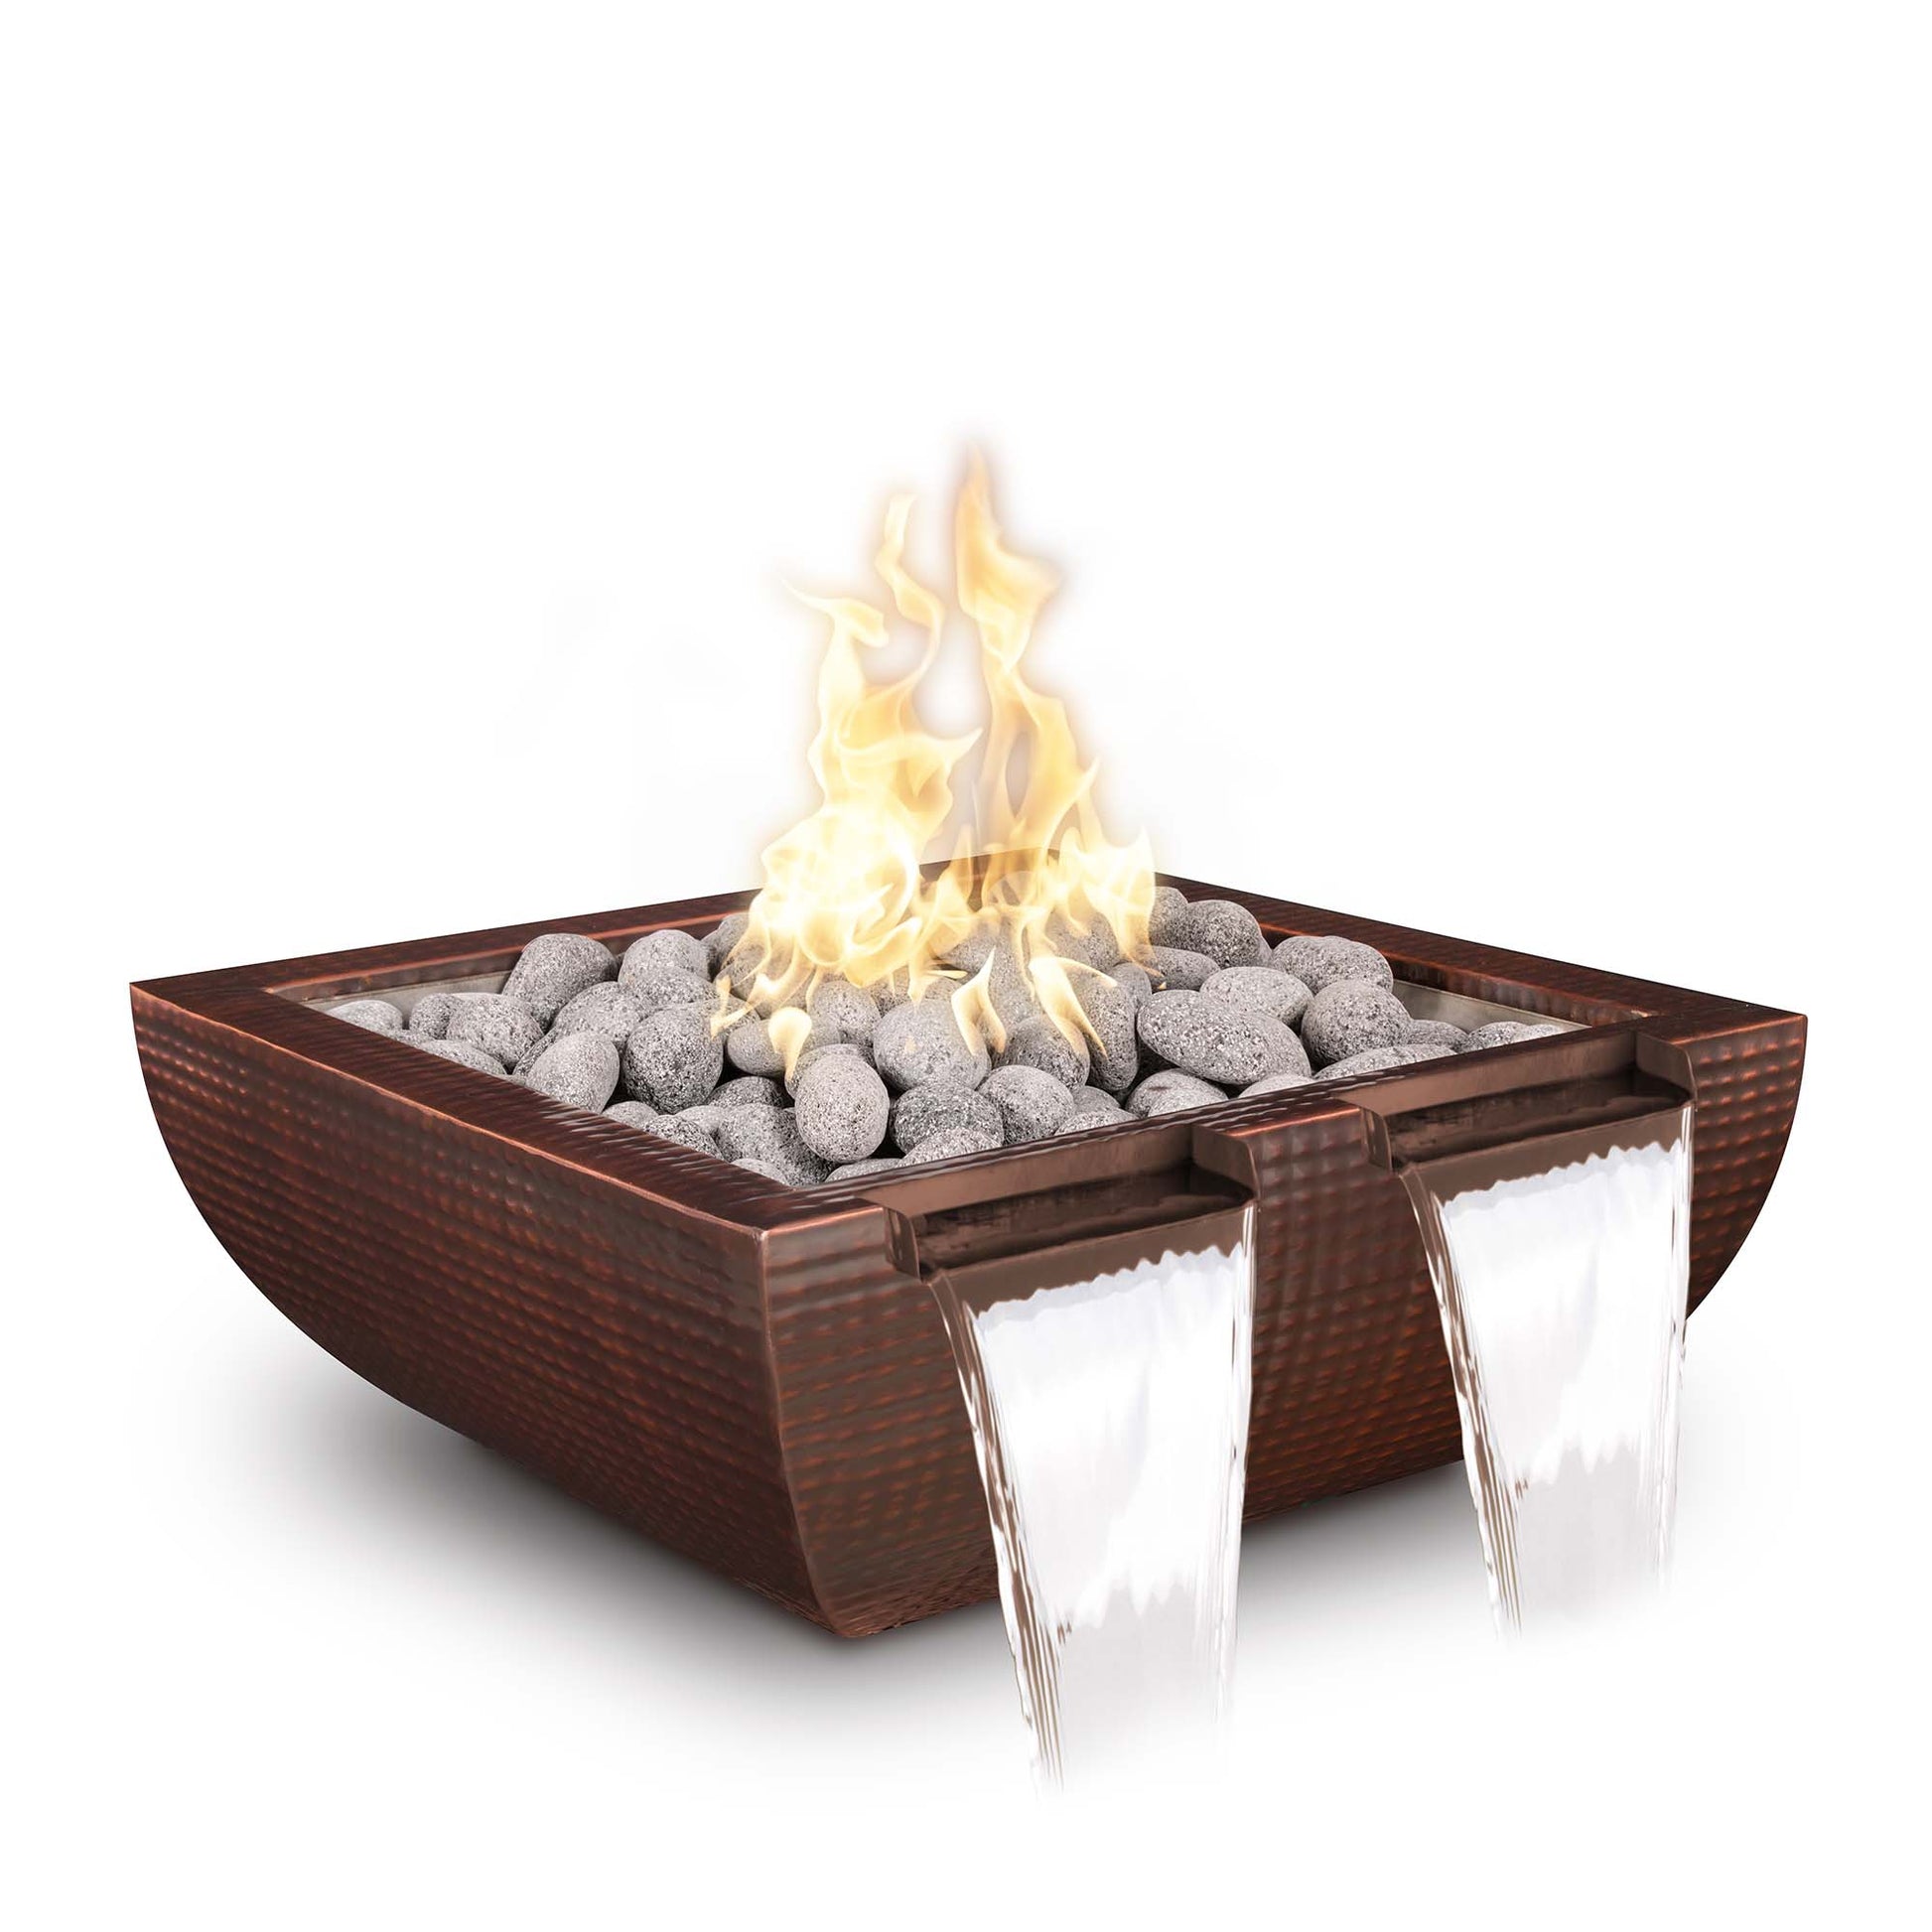 The Outdoor Plus Avalon Twin Spill 36" Copper Vein Powder Coated Metal Liquid Propane Fire & Water Bowl with Match Lit with Flame Sense Ignition